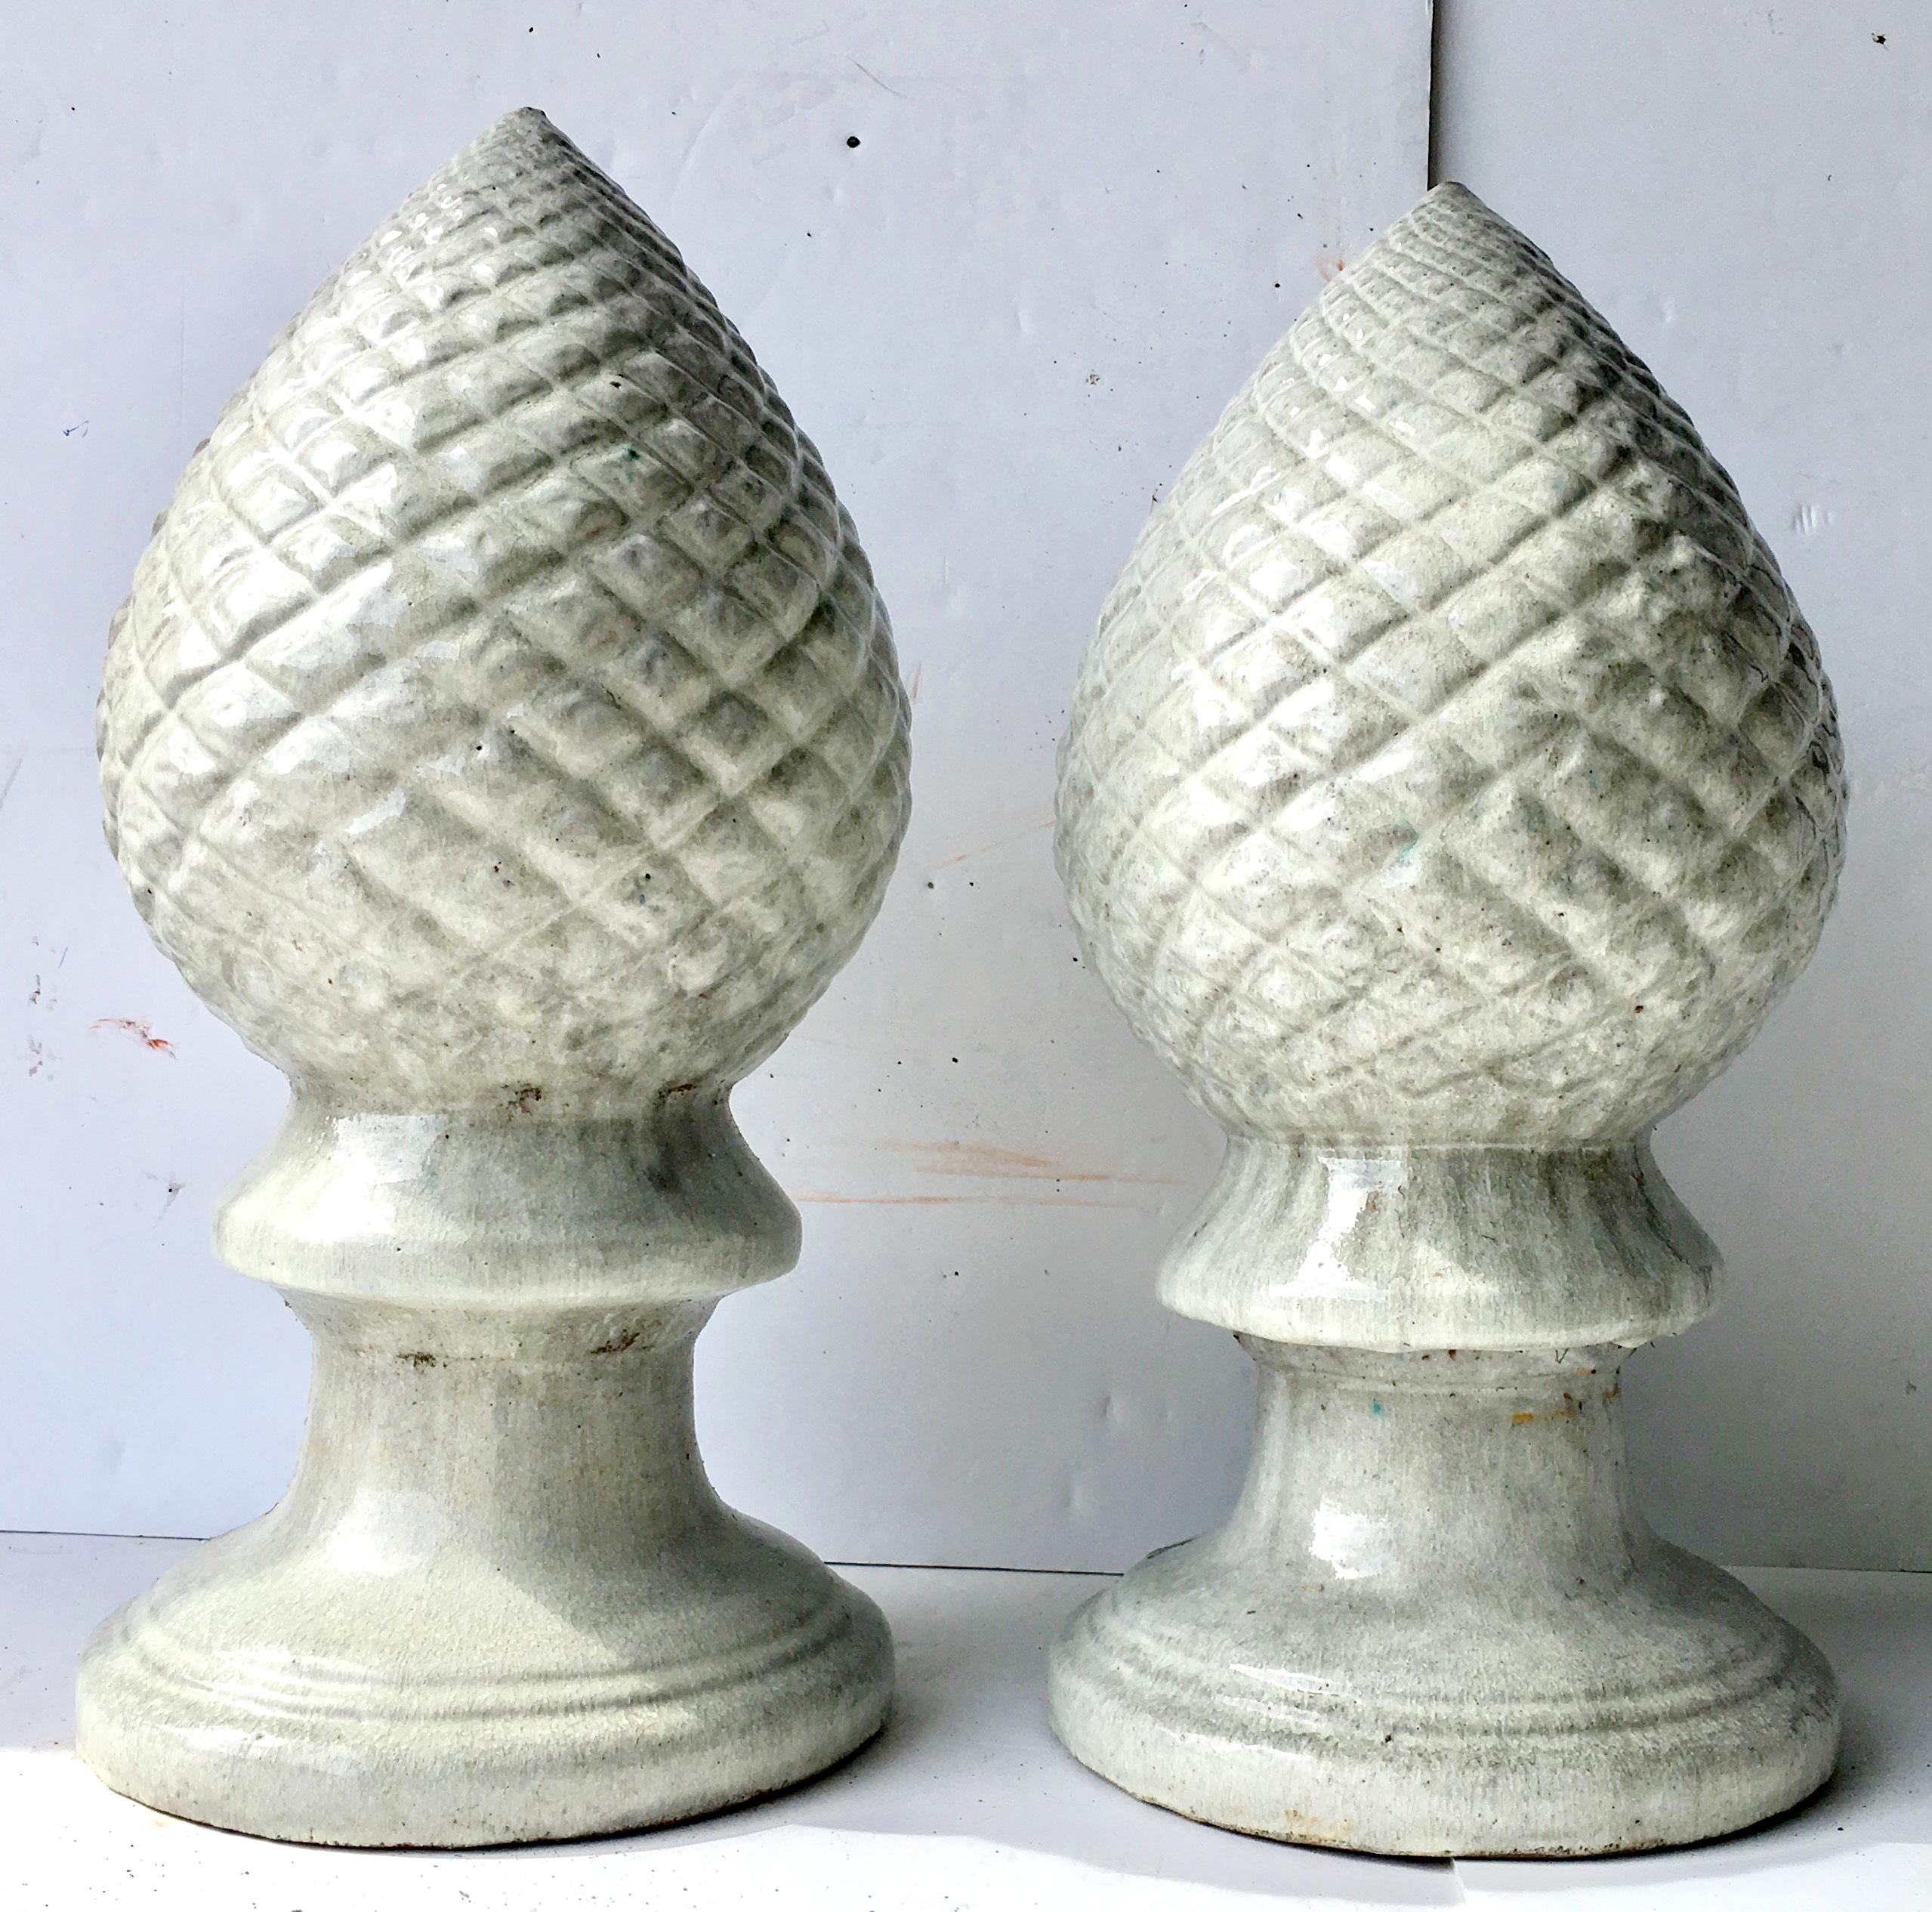 21st Century Contemporary Pair of Ceramic Glaze off white to grey tone textured cone finials. Great for indoor or outdoor use.
 